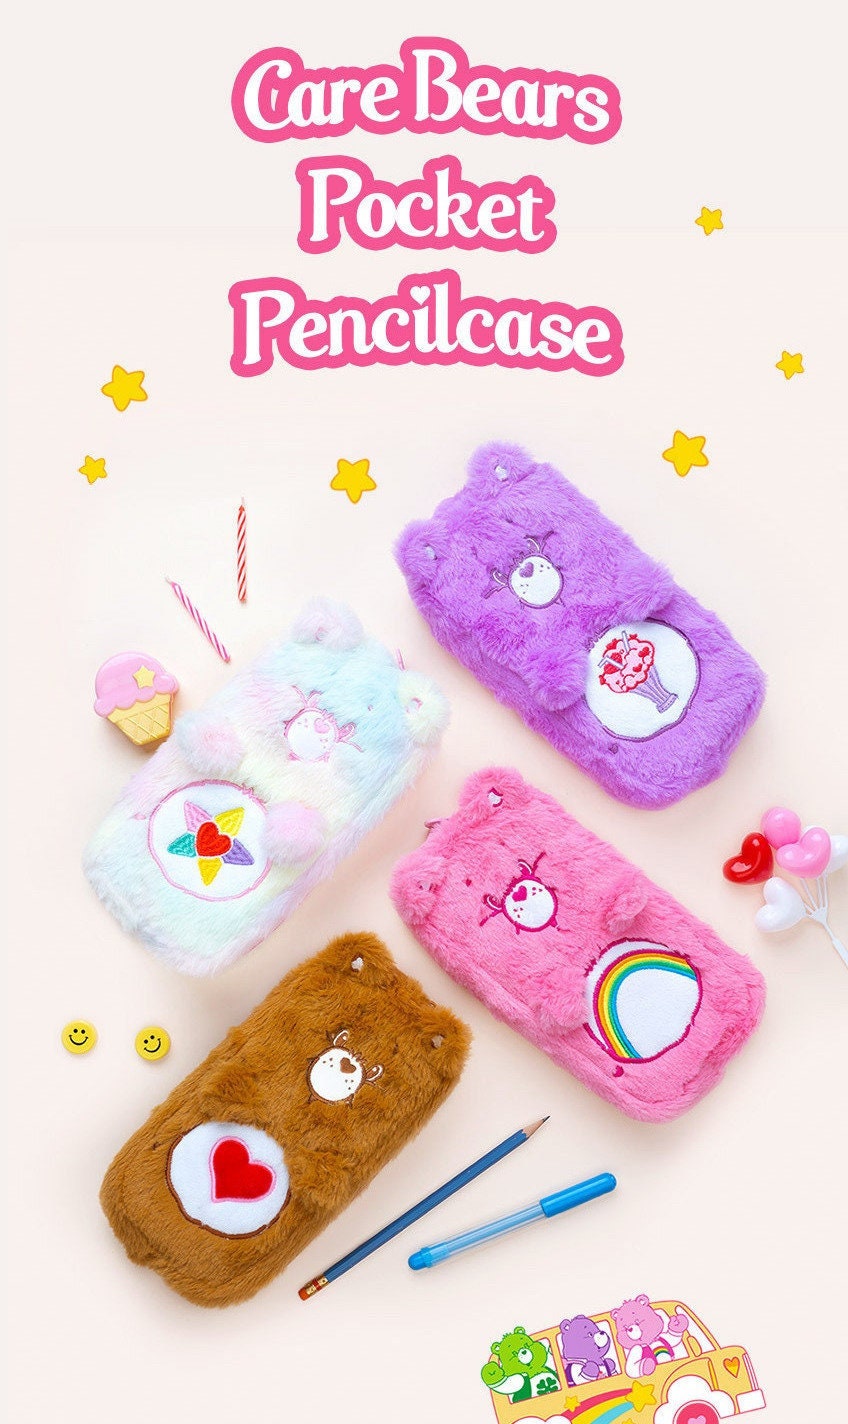 This Care Bears Skincare Collection Includes Bear-y Cute Pouches